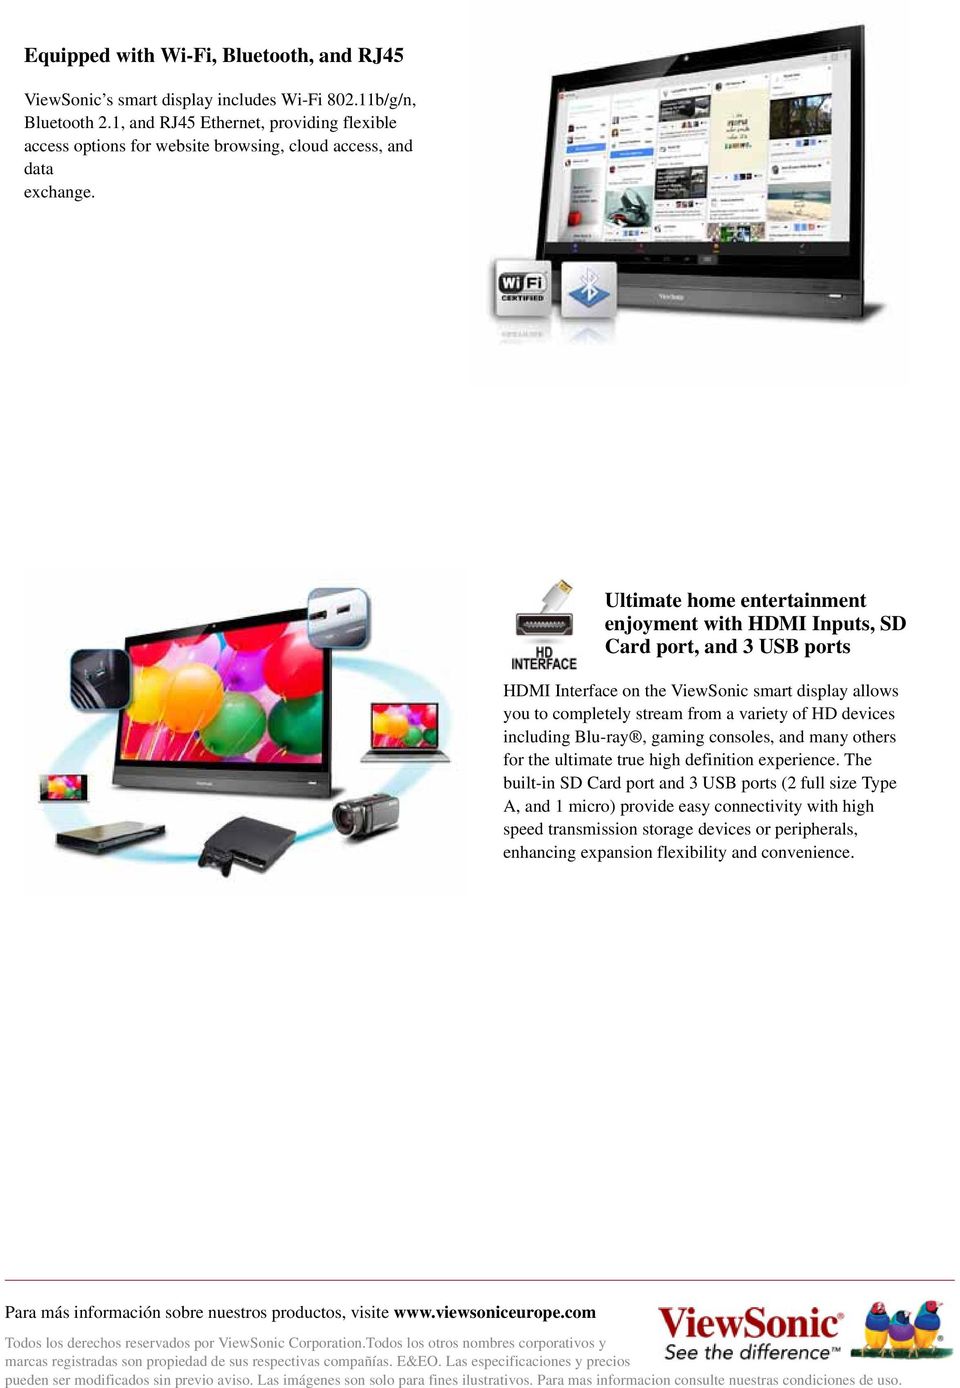 Ultimate home entertainment enjoyment with HDMI Inputs, SD Card port, and 3 USB ports HDMI Interface on the ViewSonic smart display allows you to completely stream from a variety